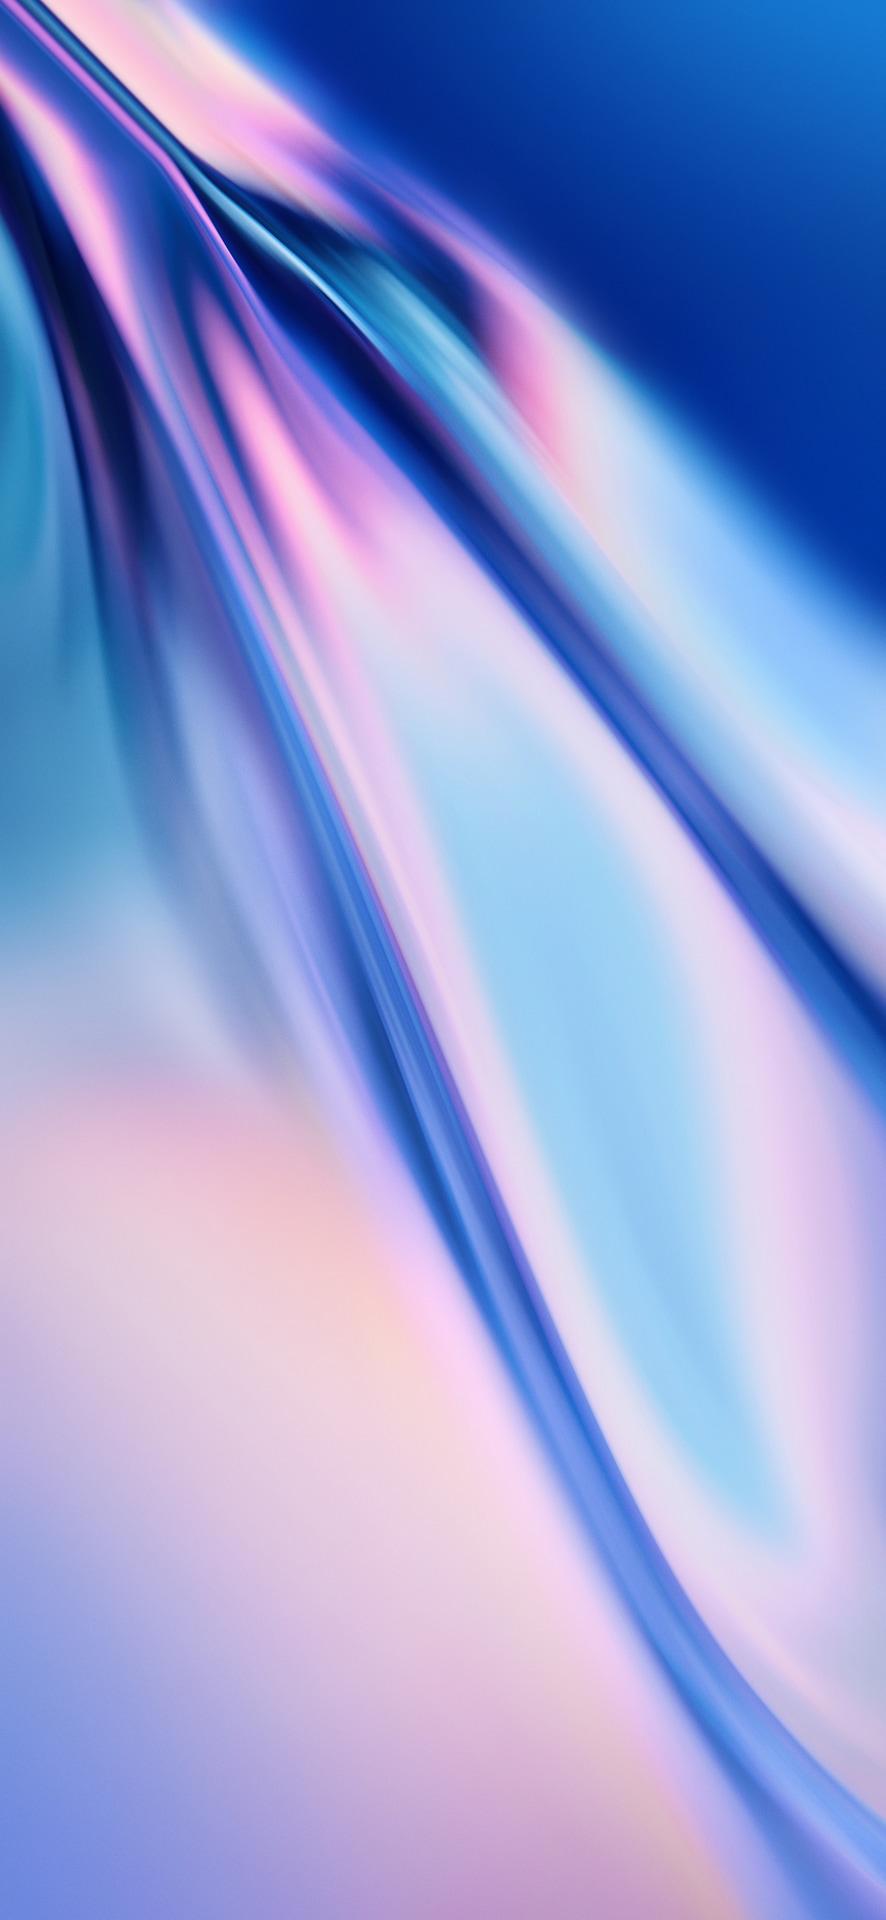 Download the OnePlus 7 Pro wallpapers here